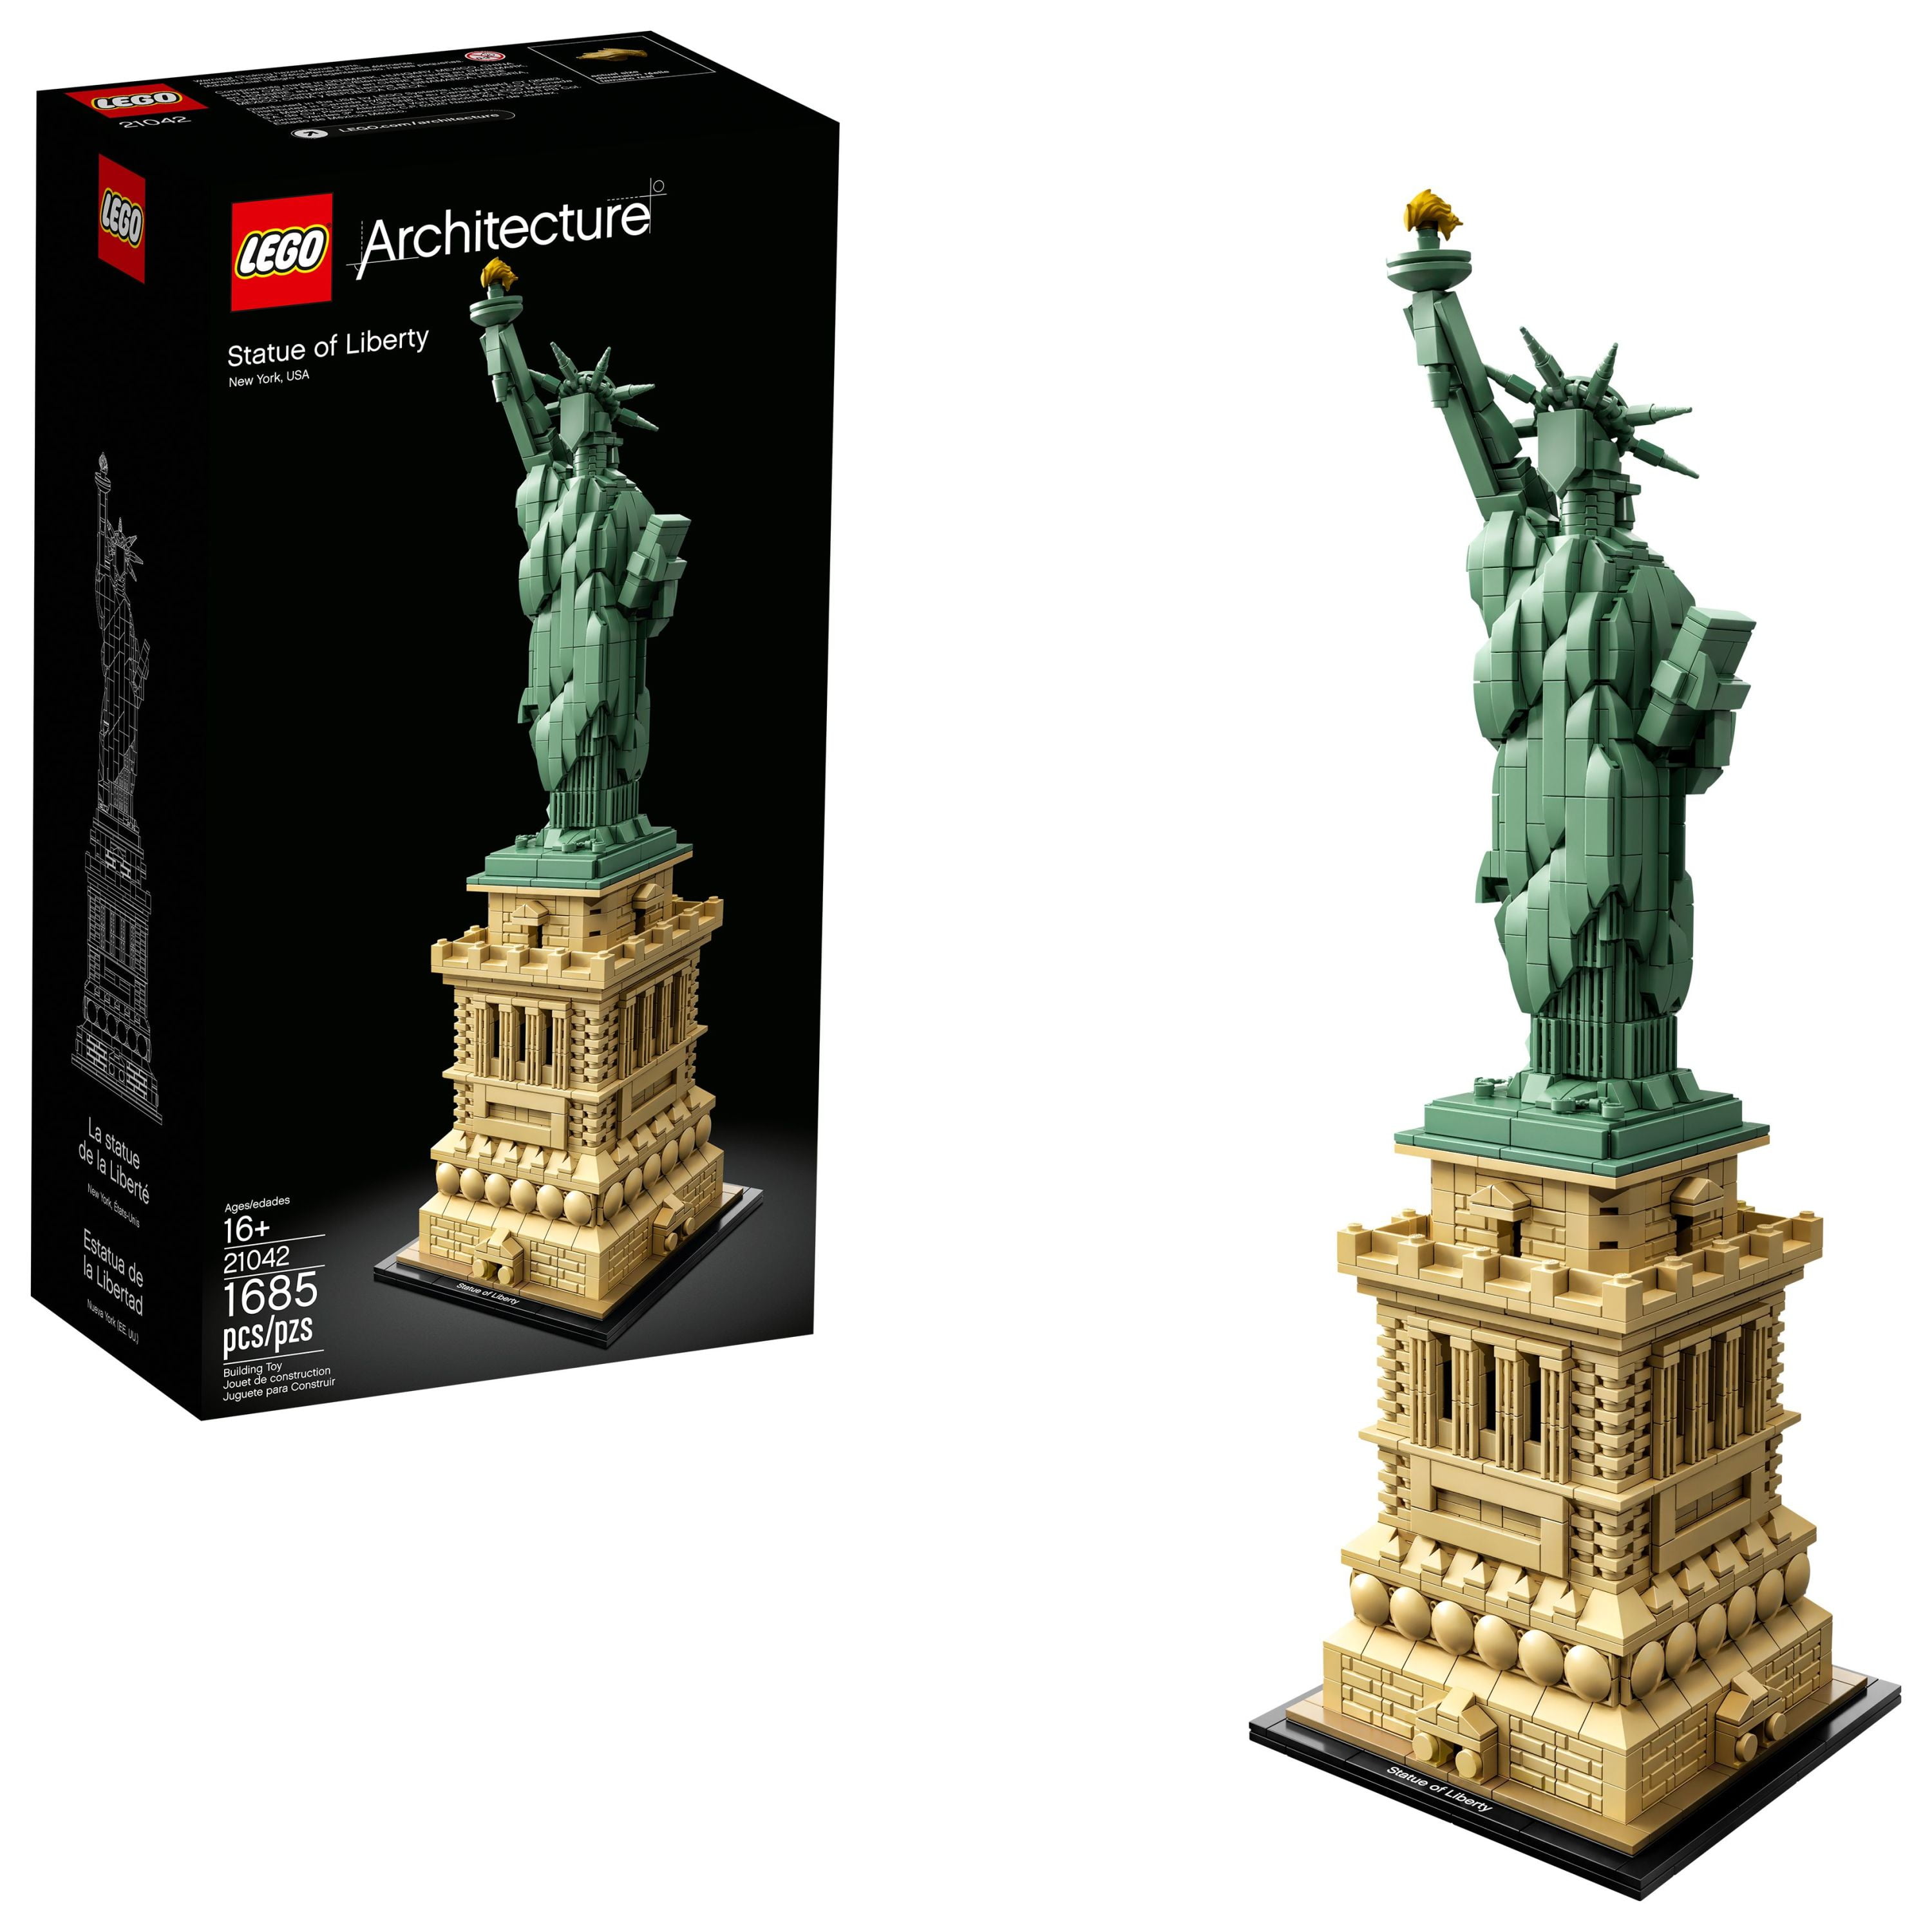 LEGO Architecture Statue of Liberty 21042 Model Building Set - Collectible New York City Souvenir, Creative Home Décor Office Centerpiece, Great Gift Idea for Adults and Teens - Walmart.com